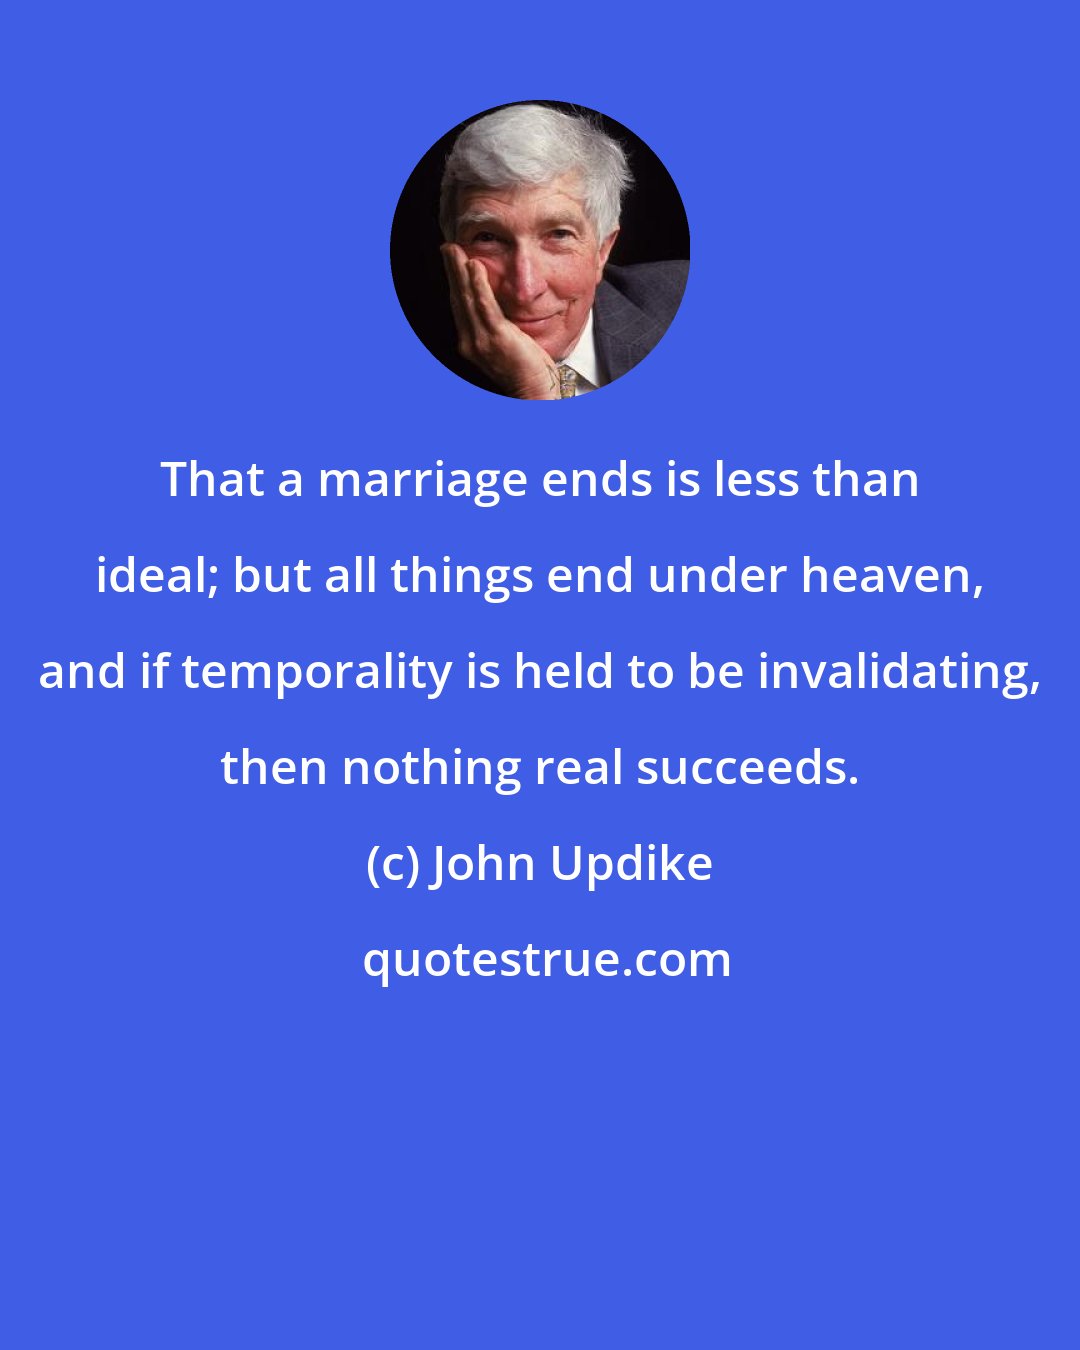 John Updike: That a marriage ends is less than ideal; but all things end under heaven, and if temporality is held to be invalidating, then nothing real succeeds.